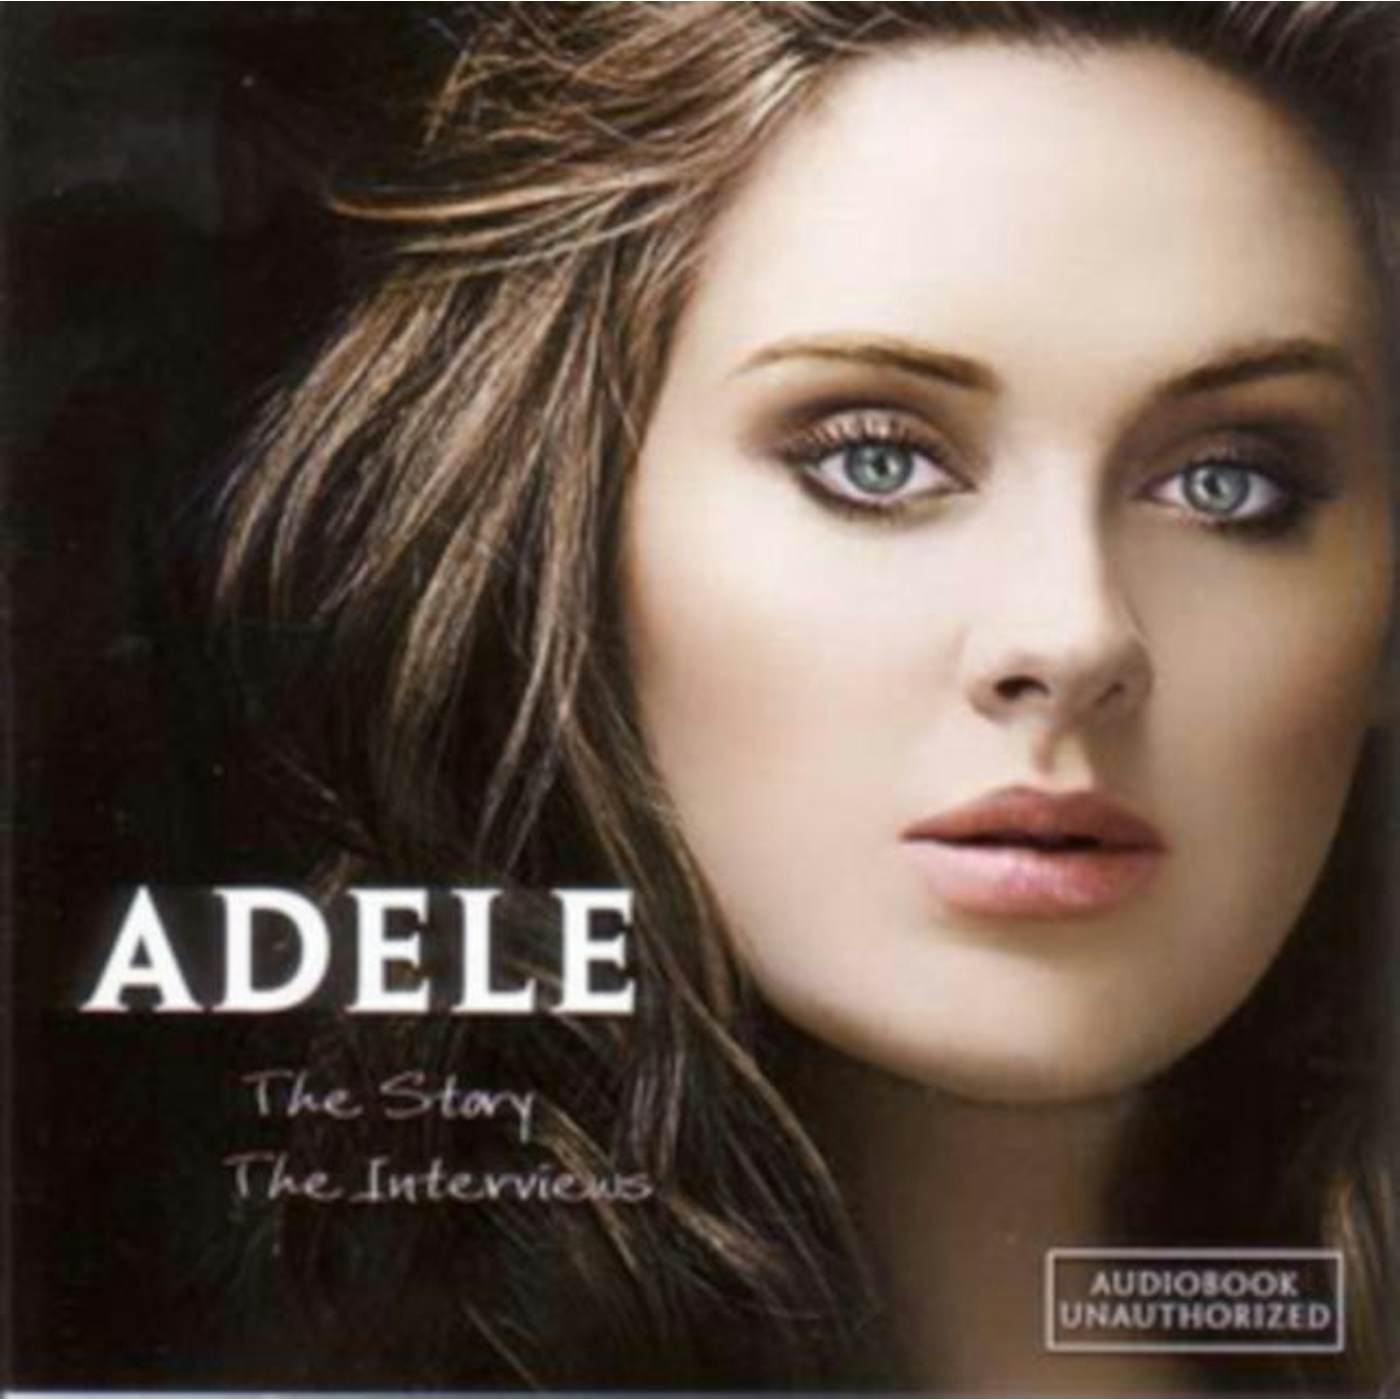 Adele CD - The Story - The Interviews